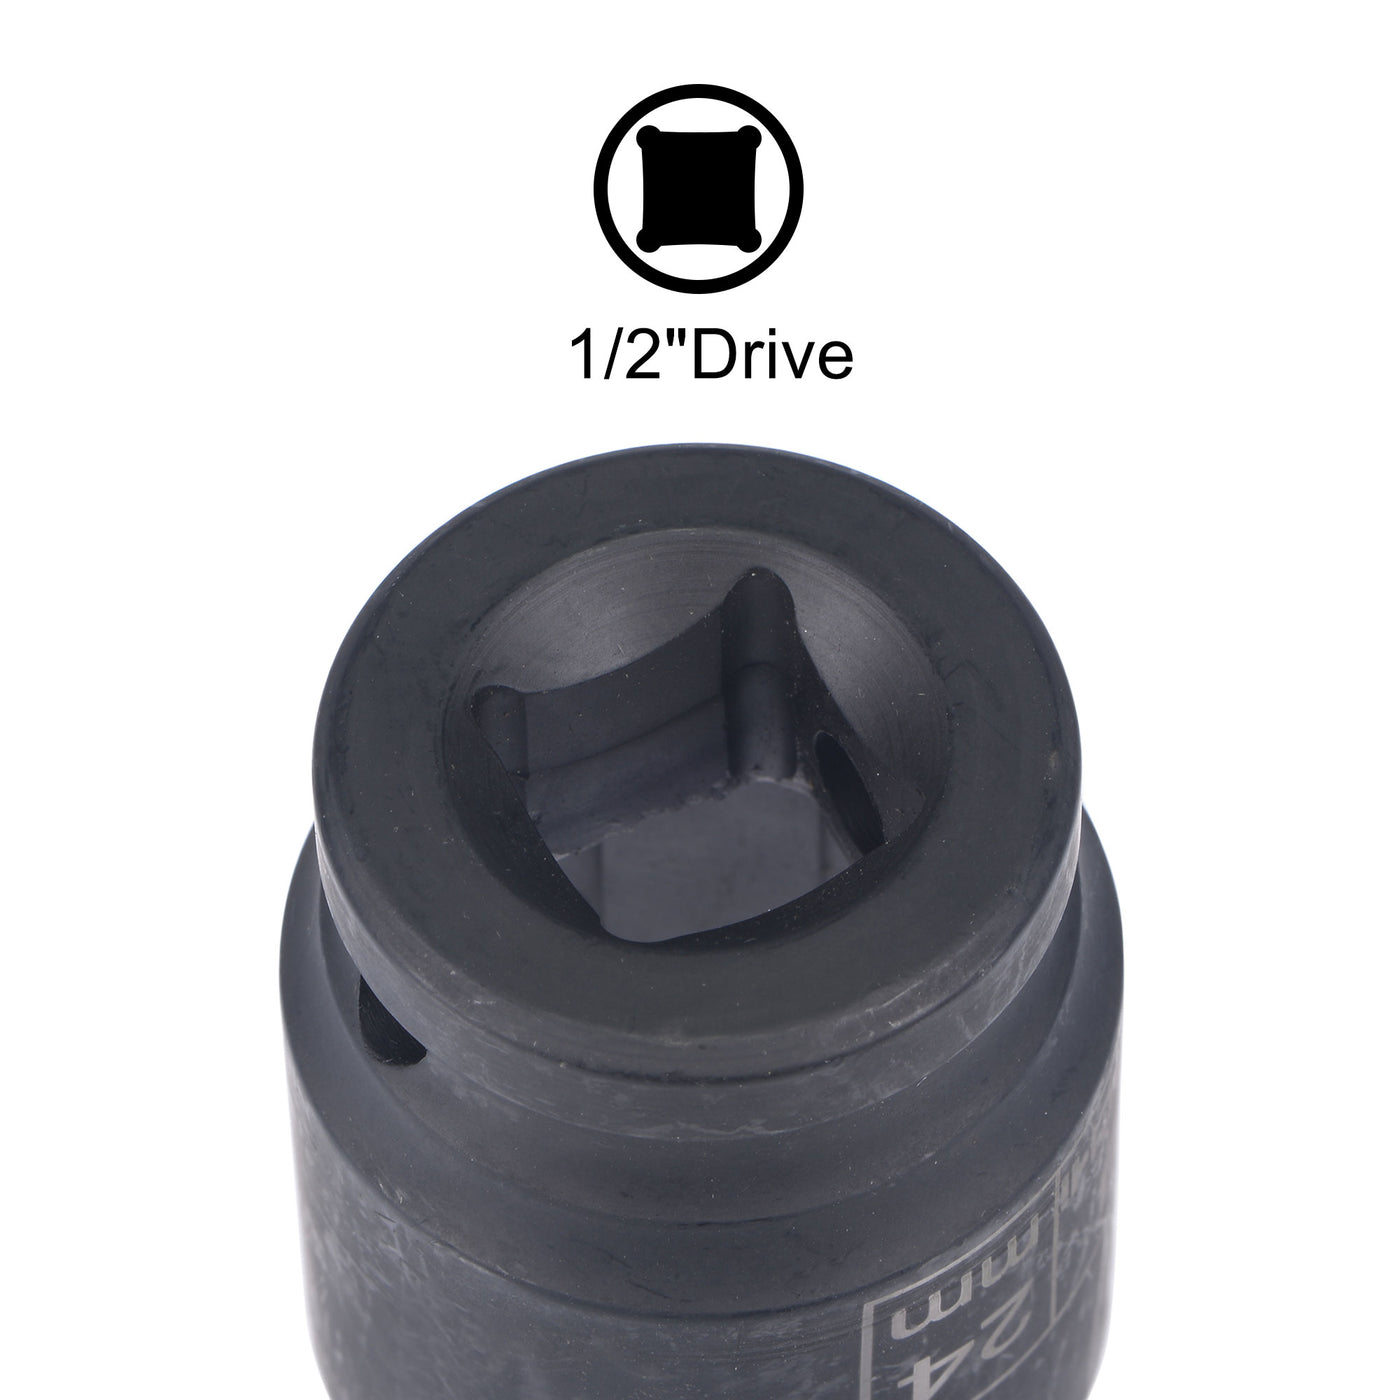 uxcell Uxcell 1/2" Drive by 24mm 6-Point Impact Socket, CR-V Steel 1.61" Length, Shallow Metric Sizes